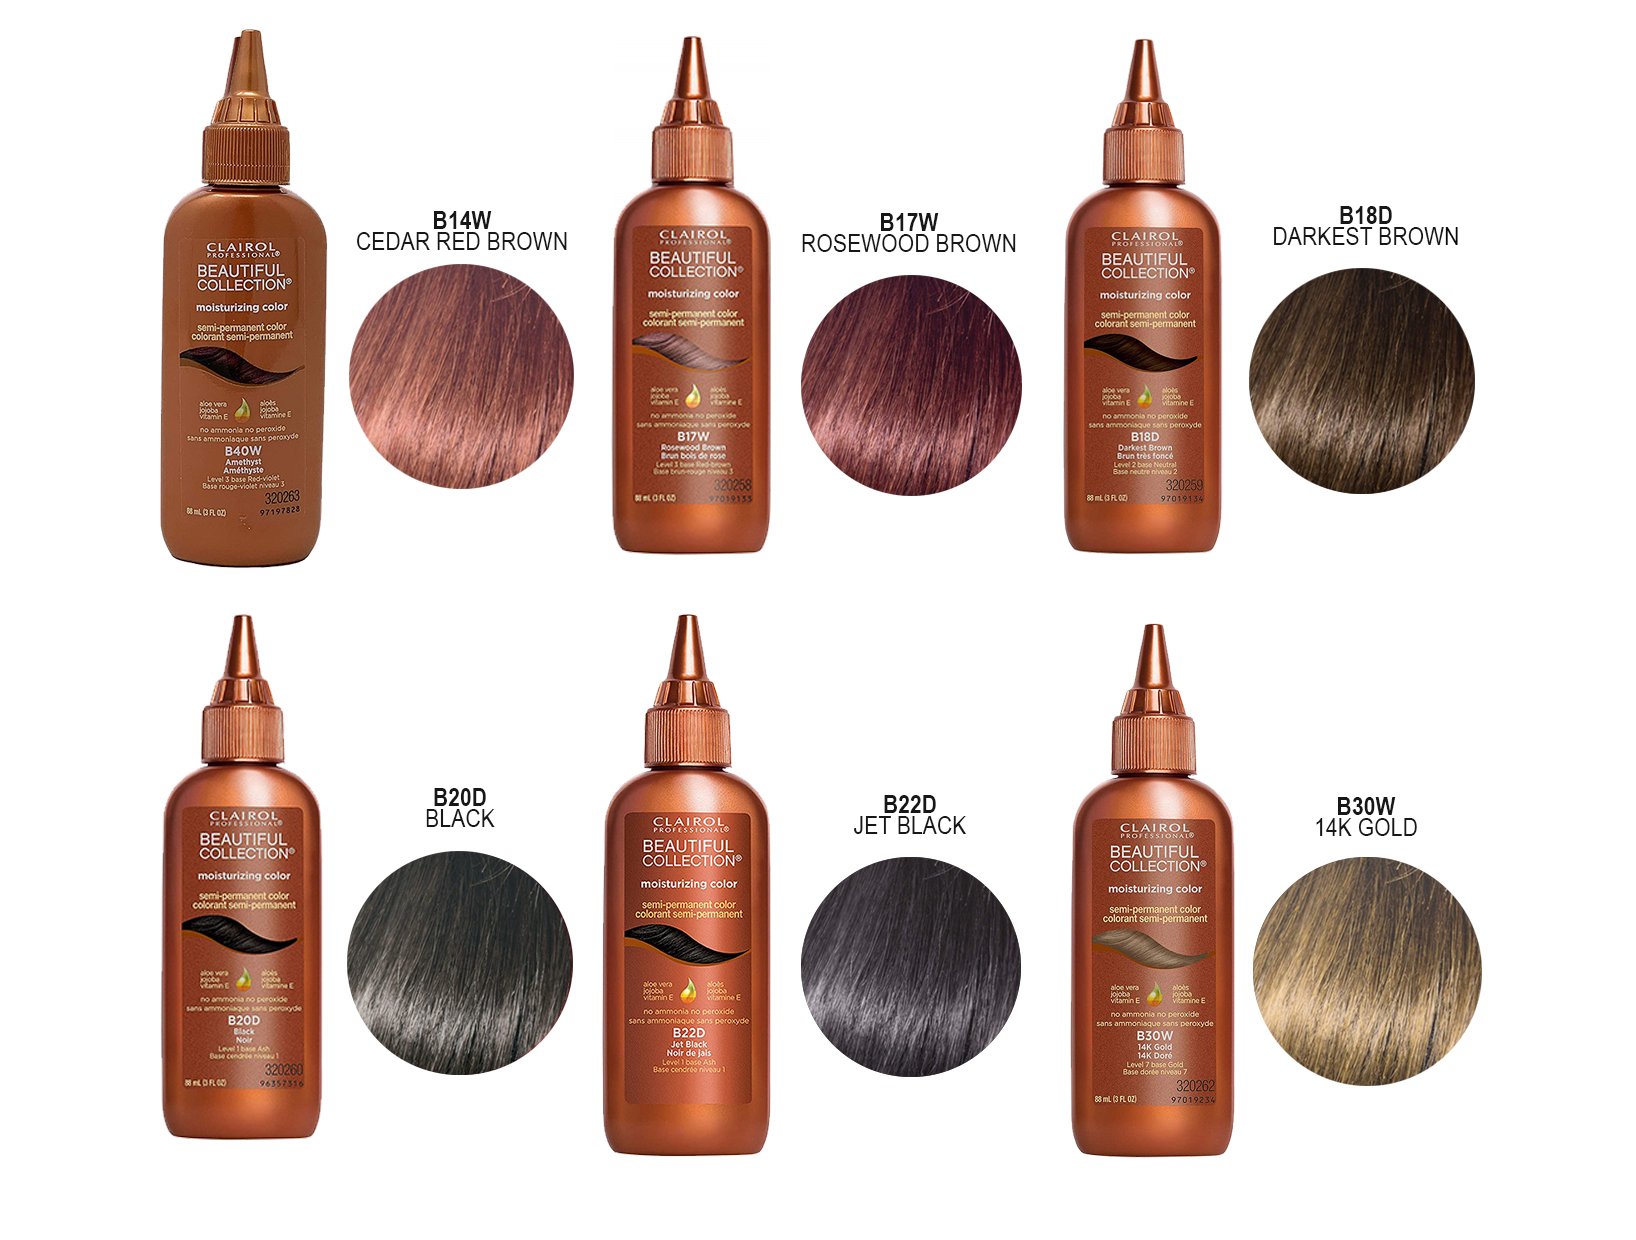 Clairol Beautiful Collection: Clairol Professional